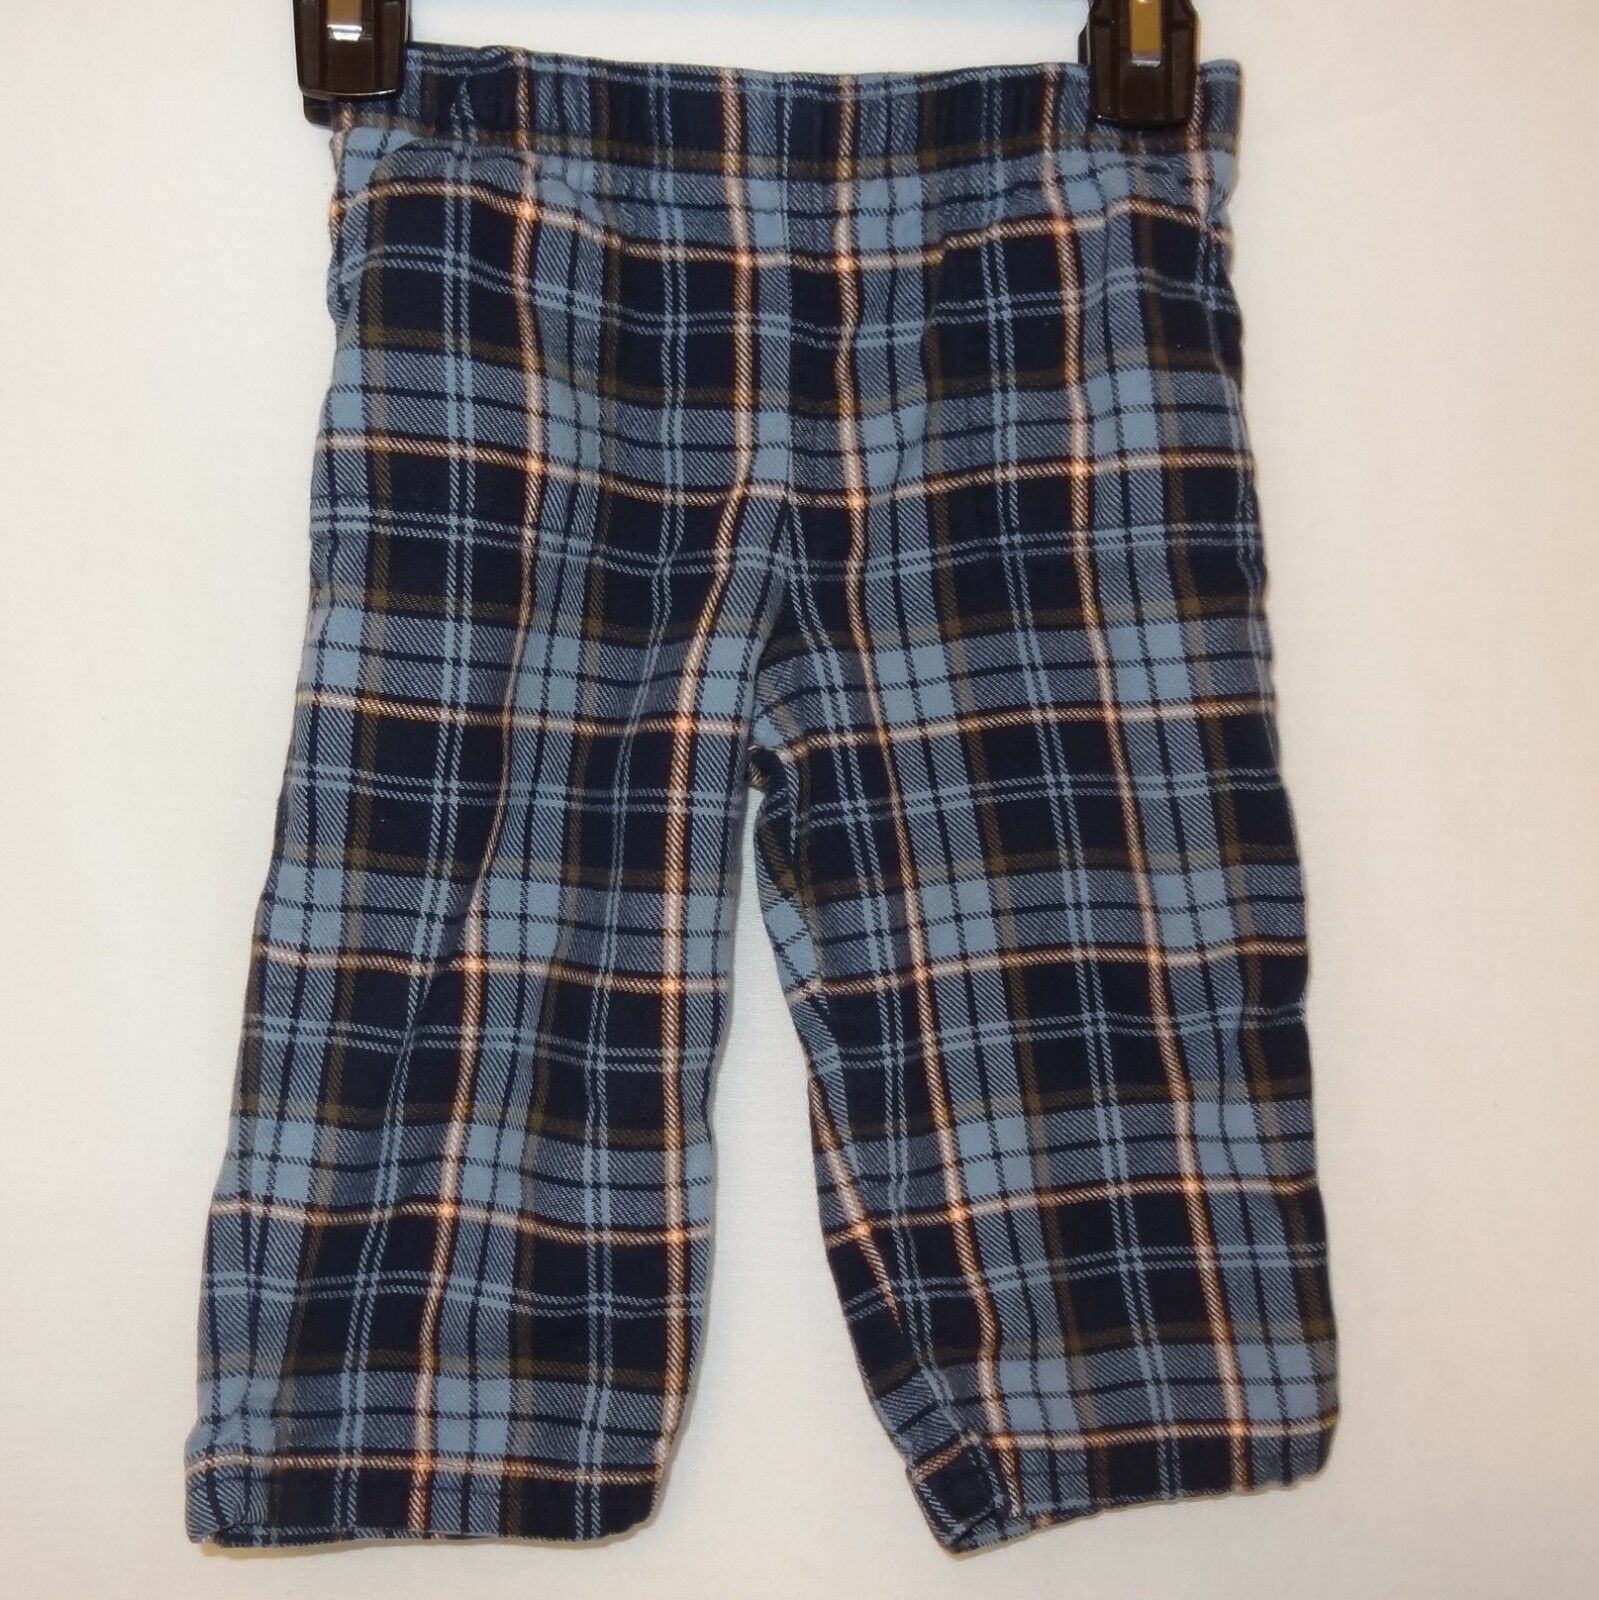 Primary image for Plaid Pajama Bottoms Blue Size 12 to 18 Months  L L Bean